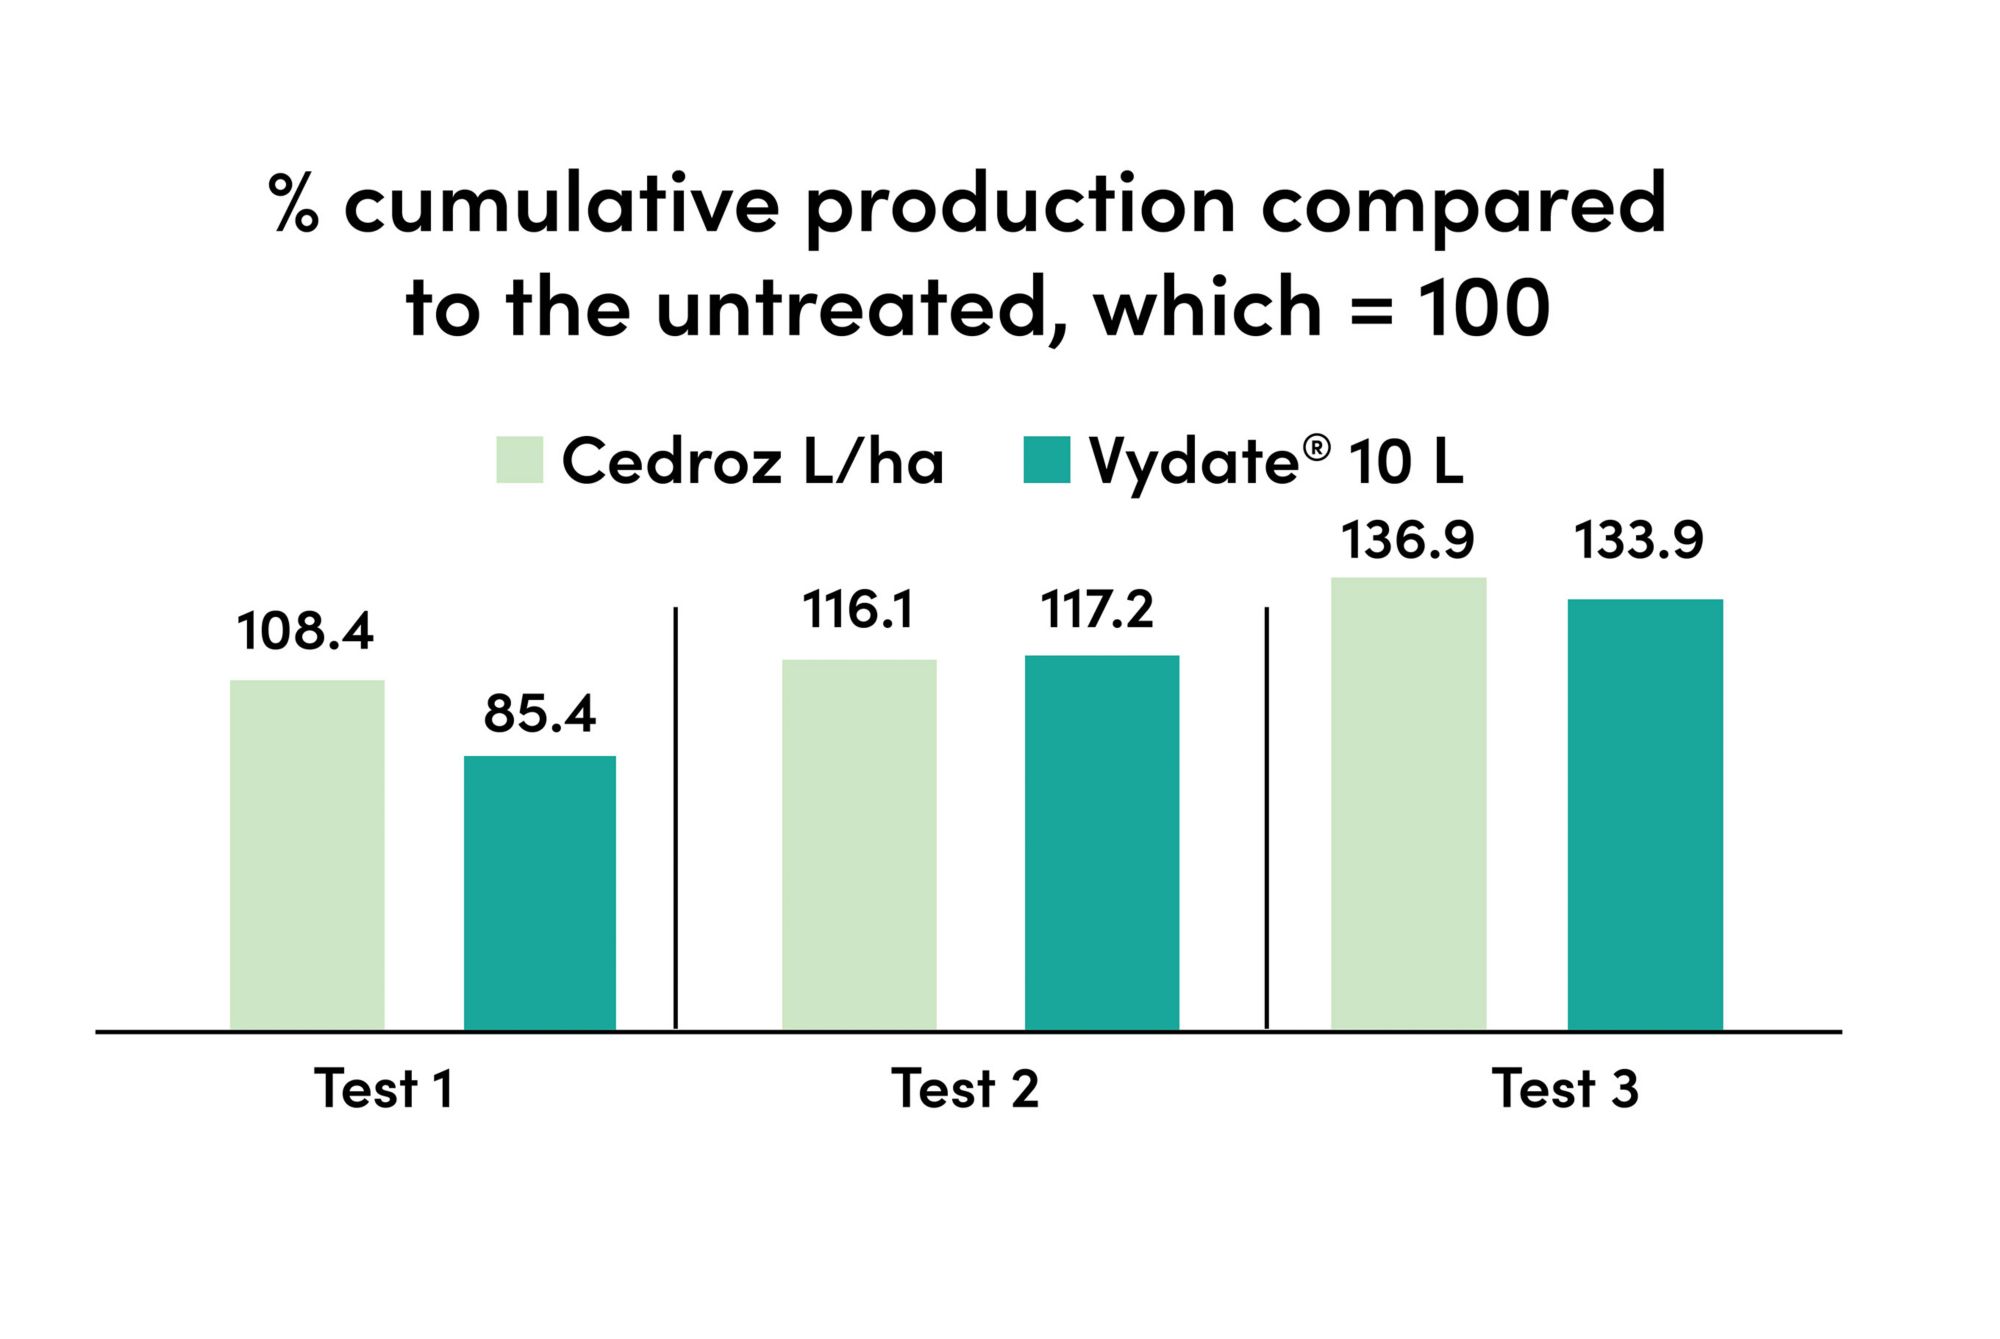 The graph shows a slight increase in tomato production using Cedroz compared to Vydate 